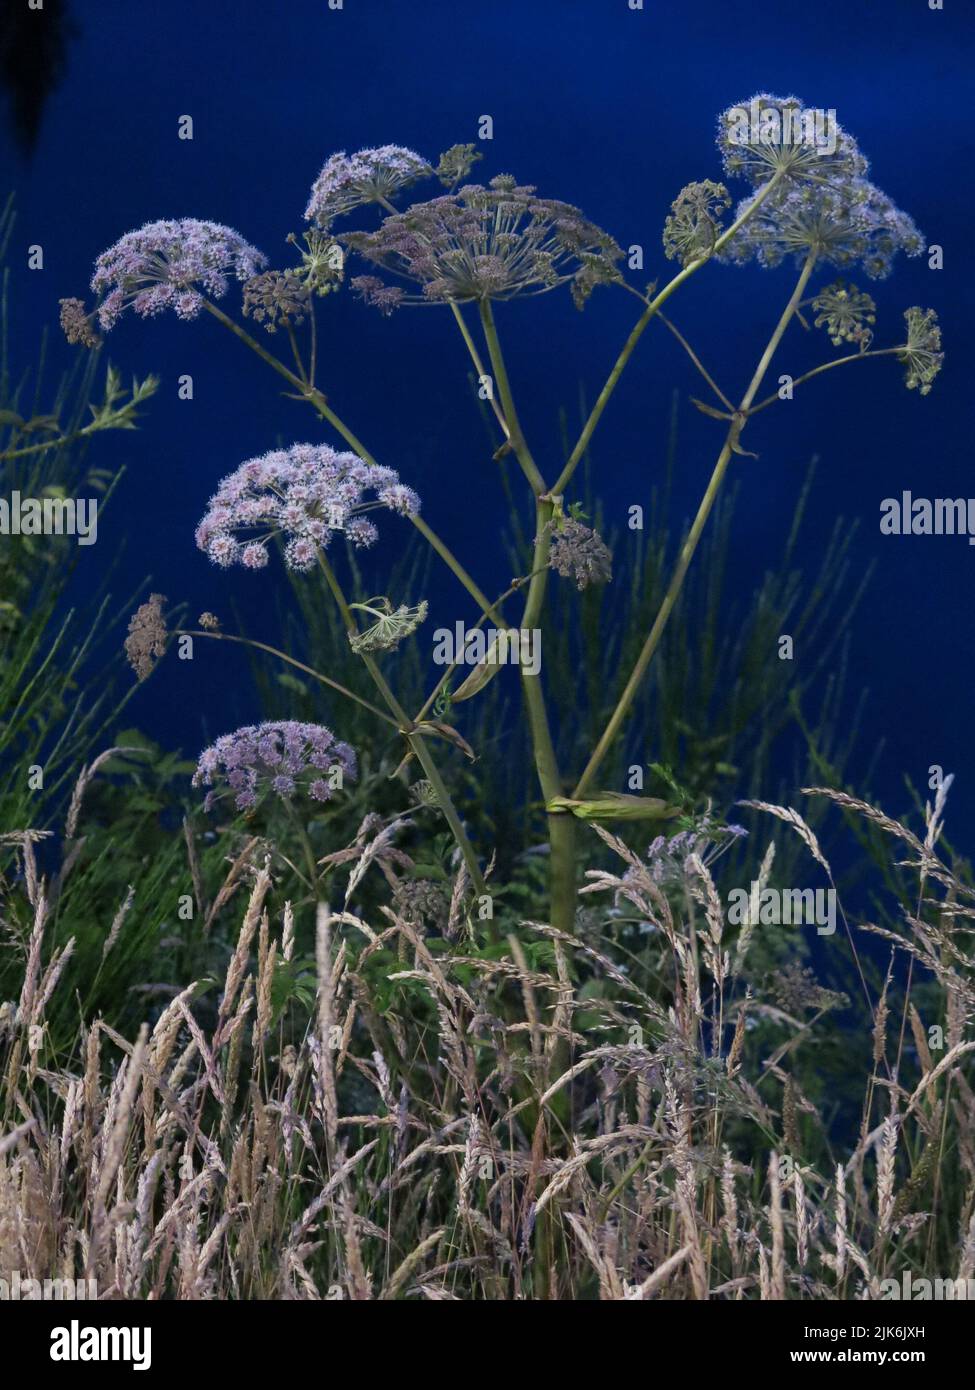 Umbellifer at twilight: statuesque flowerheads of wild angelica growing at the water's edge and shining white against deep blue water at night Stock Photo